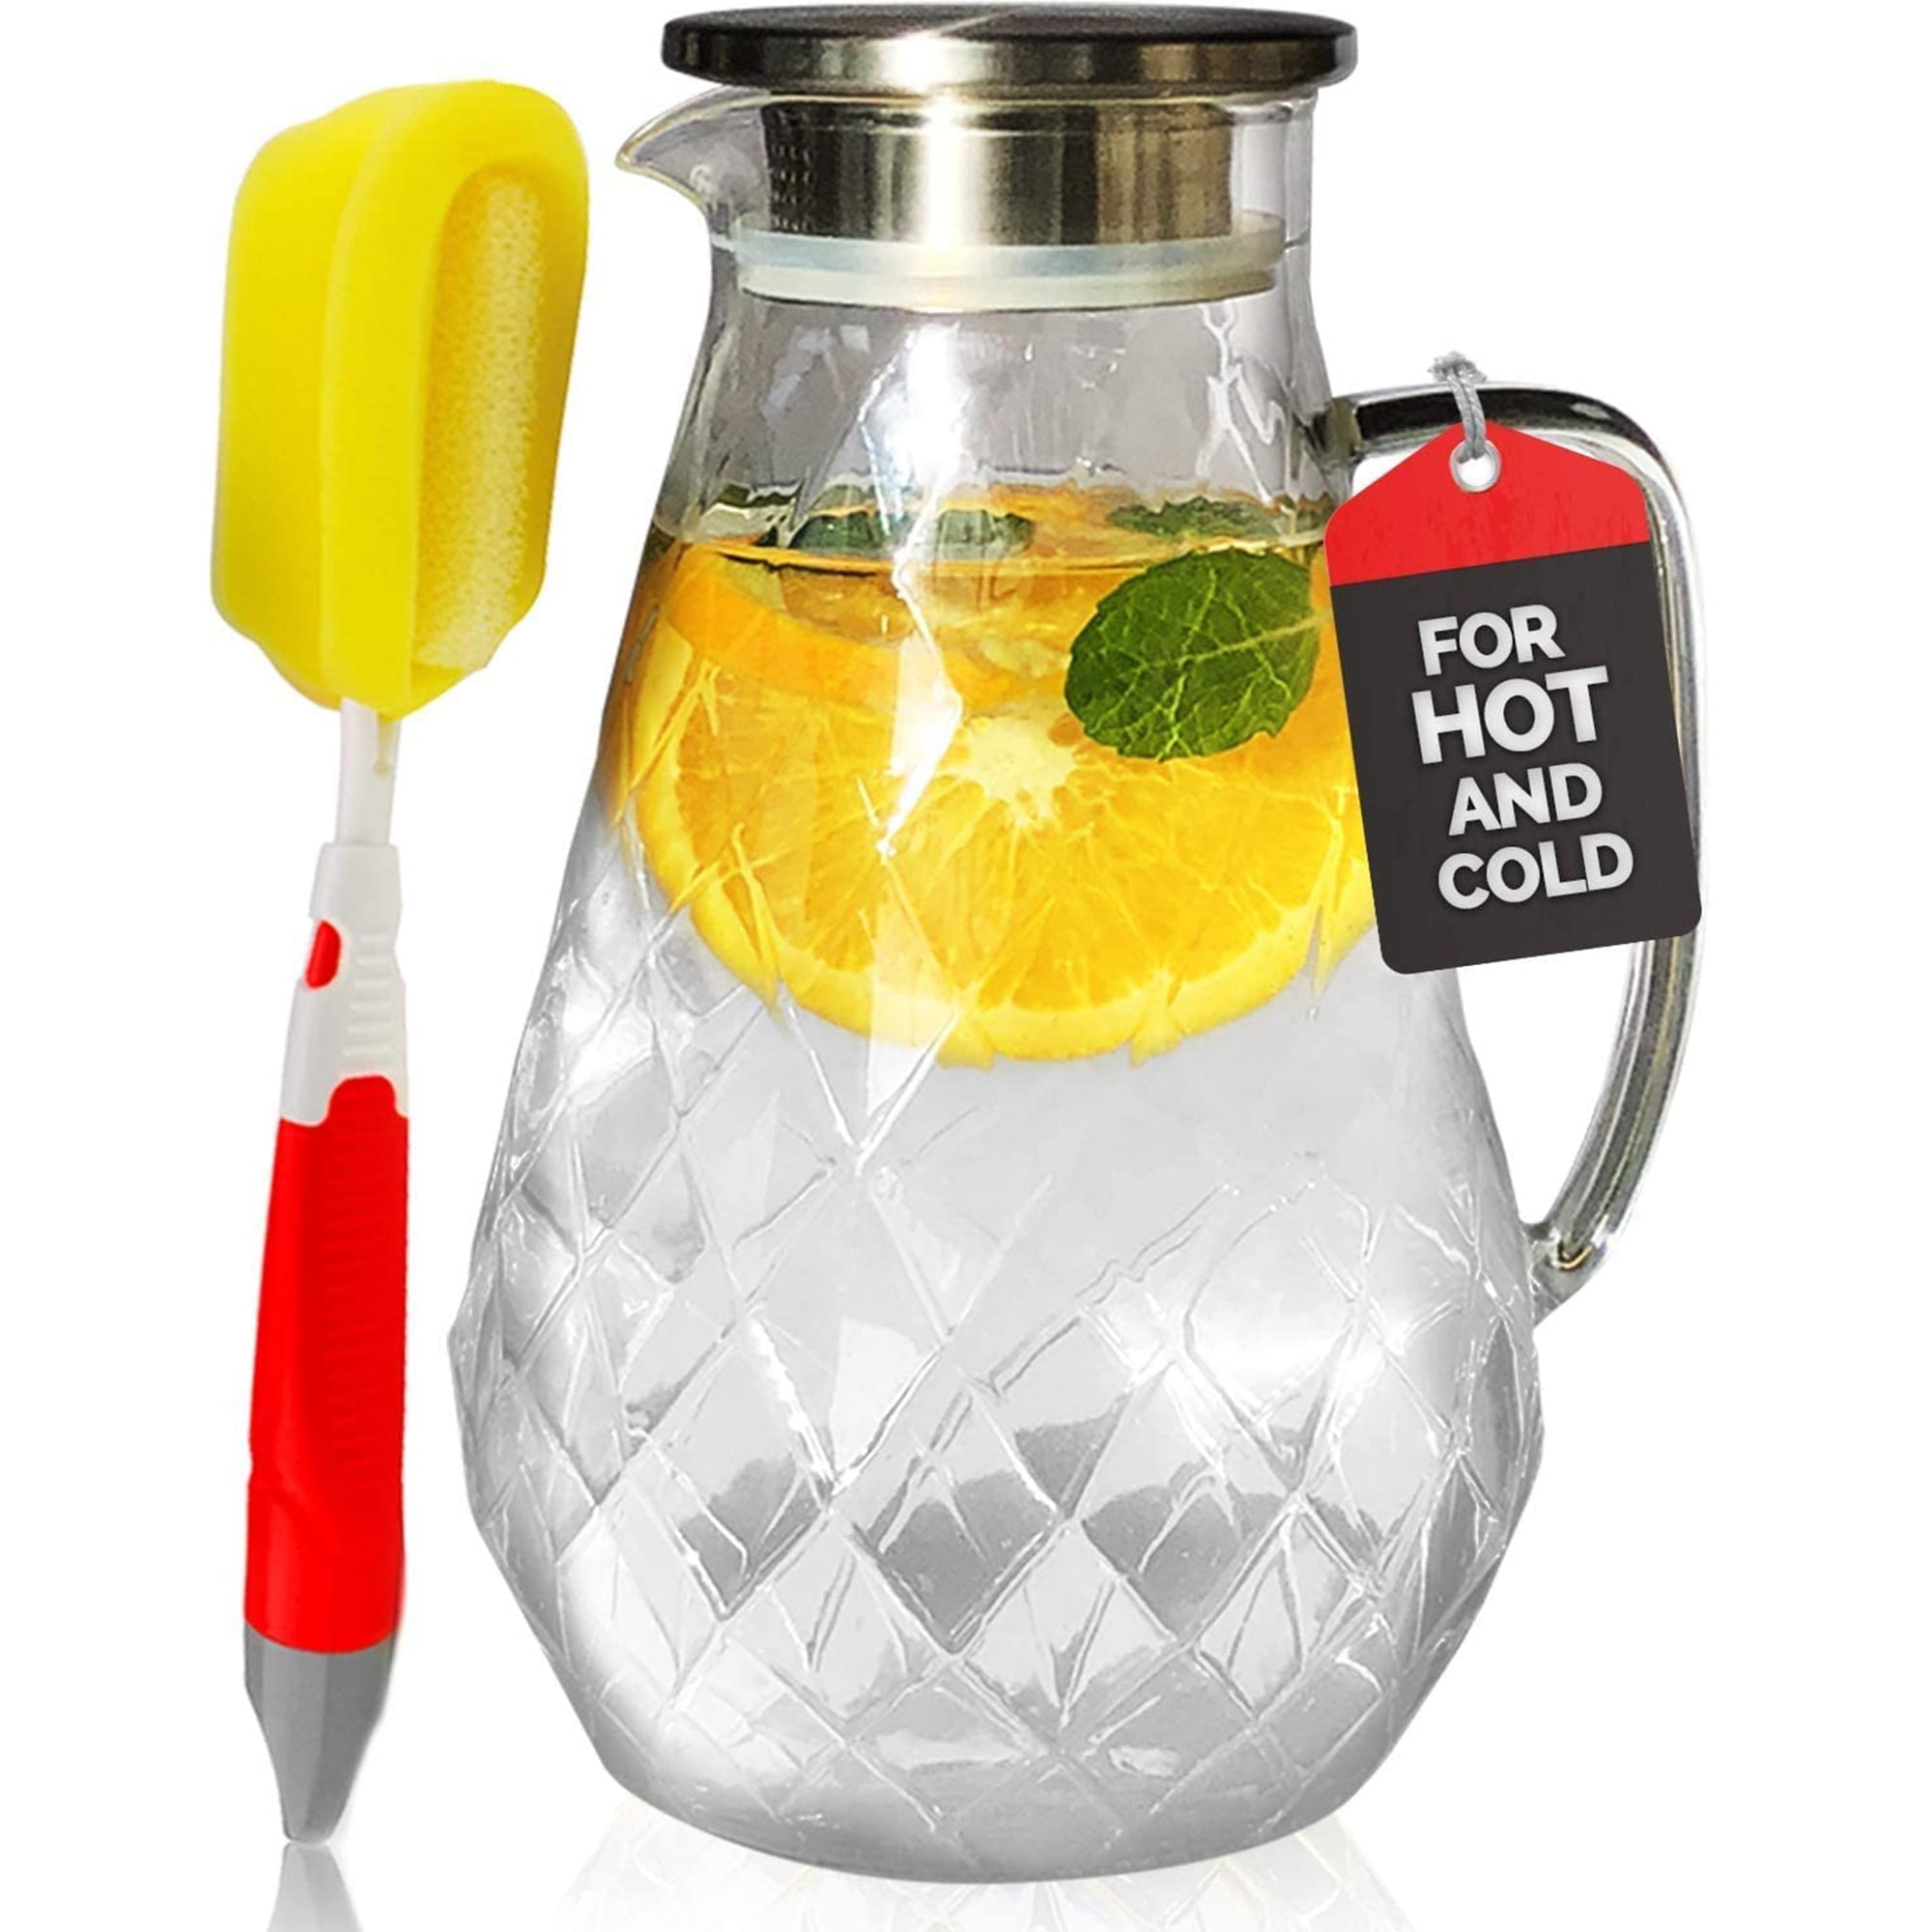 Pykal Diamond Glass Pitcher with Lid Hot and Cold Drink Dispenser, 72 Oz 